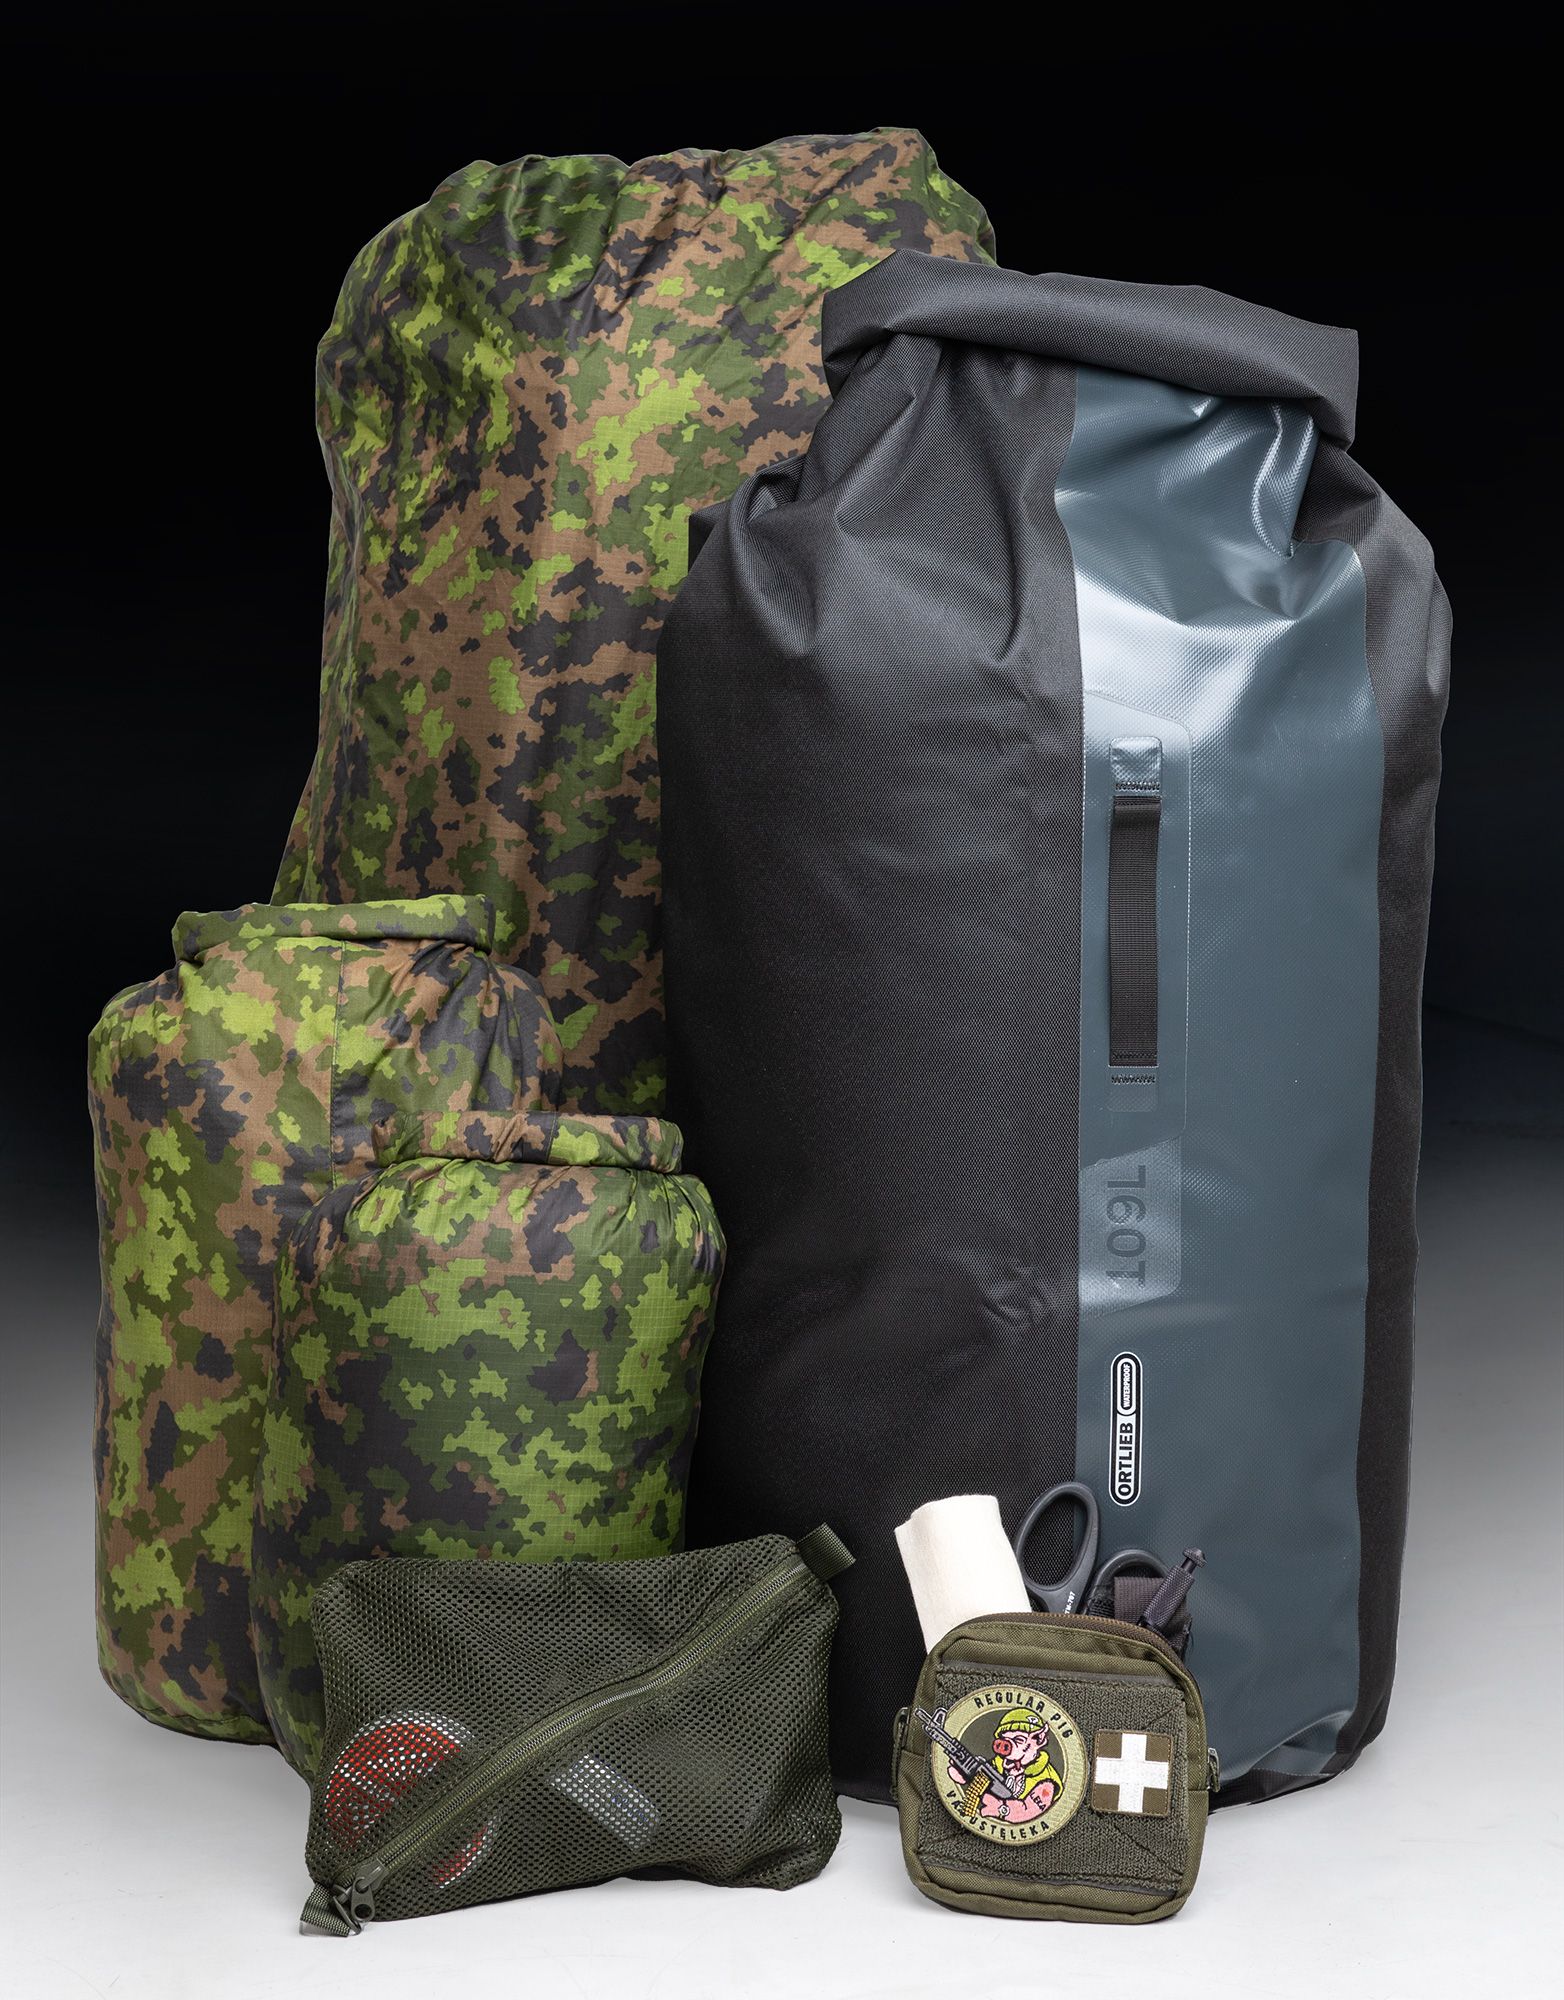 An assortment of dry bags and pack sacks